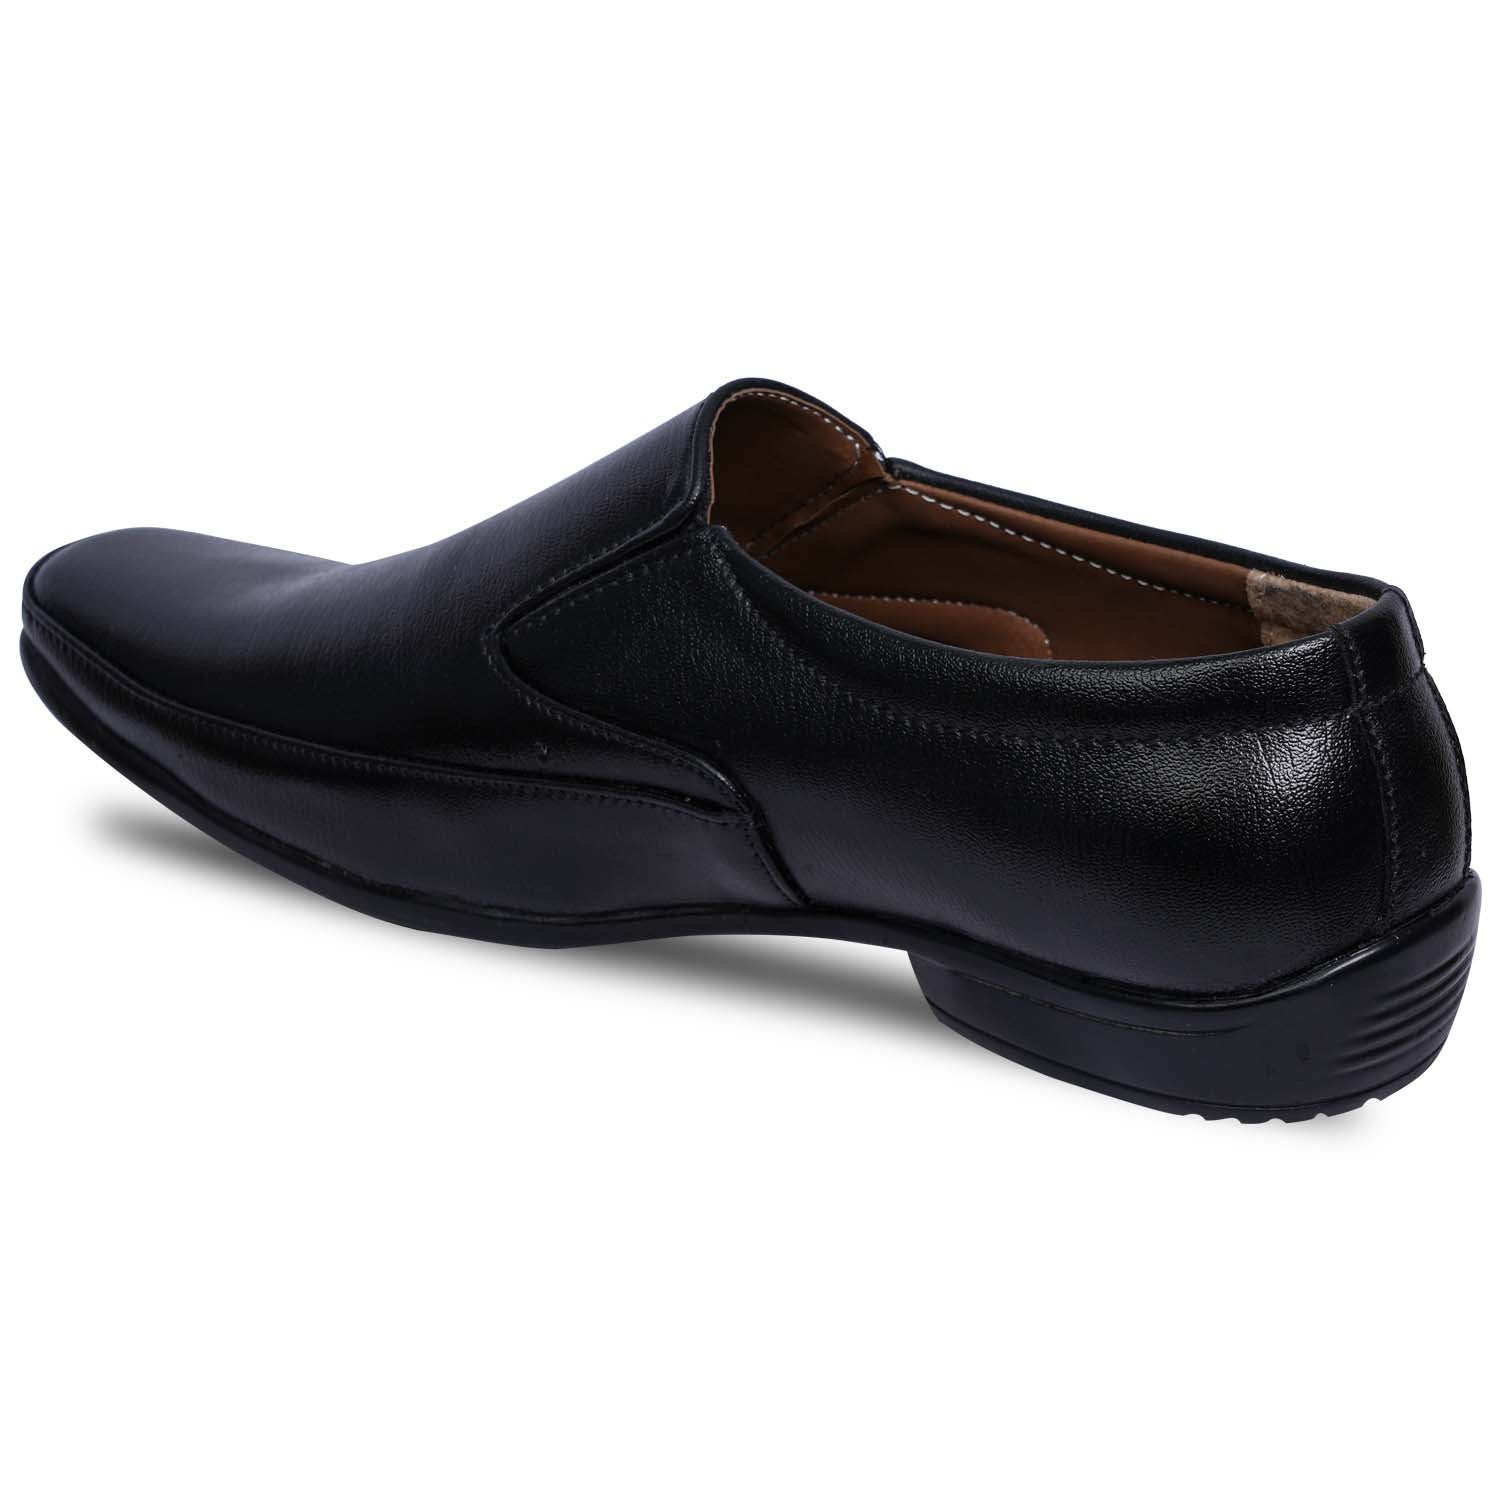 R2004G Daily Office Wear Shoes for Men - Comfortable Formal Shoes with Cushioned Footbed